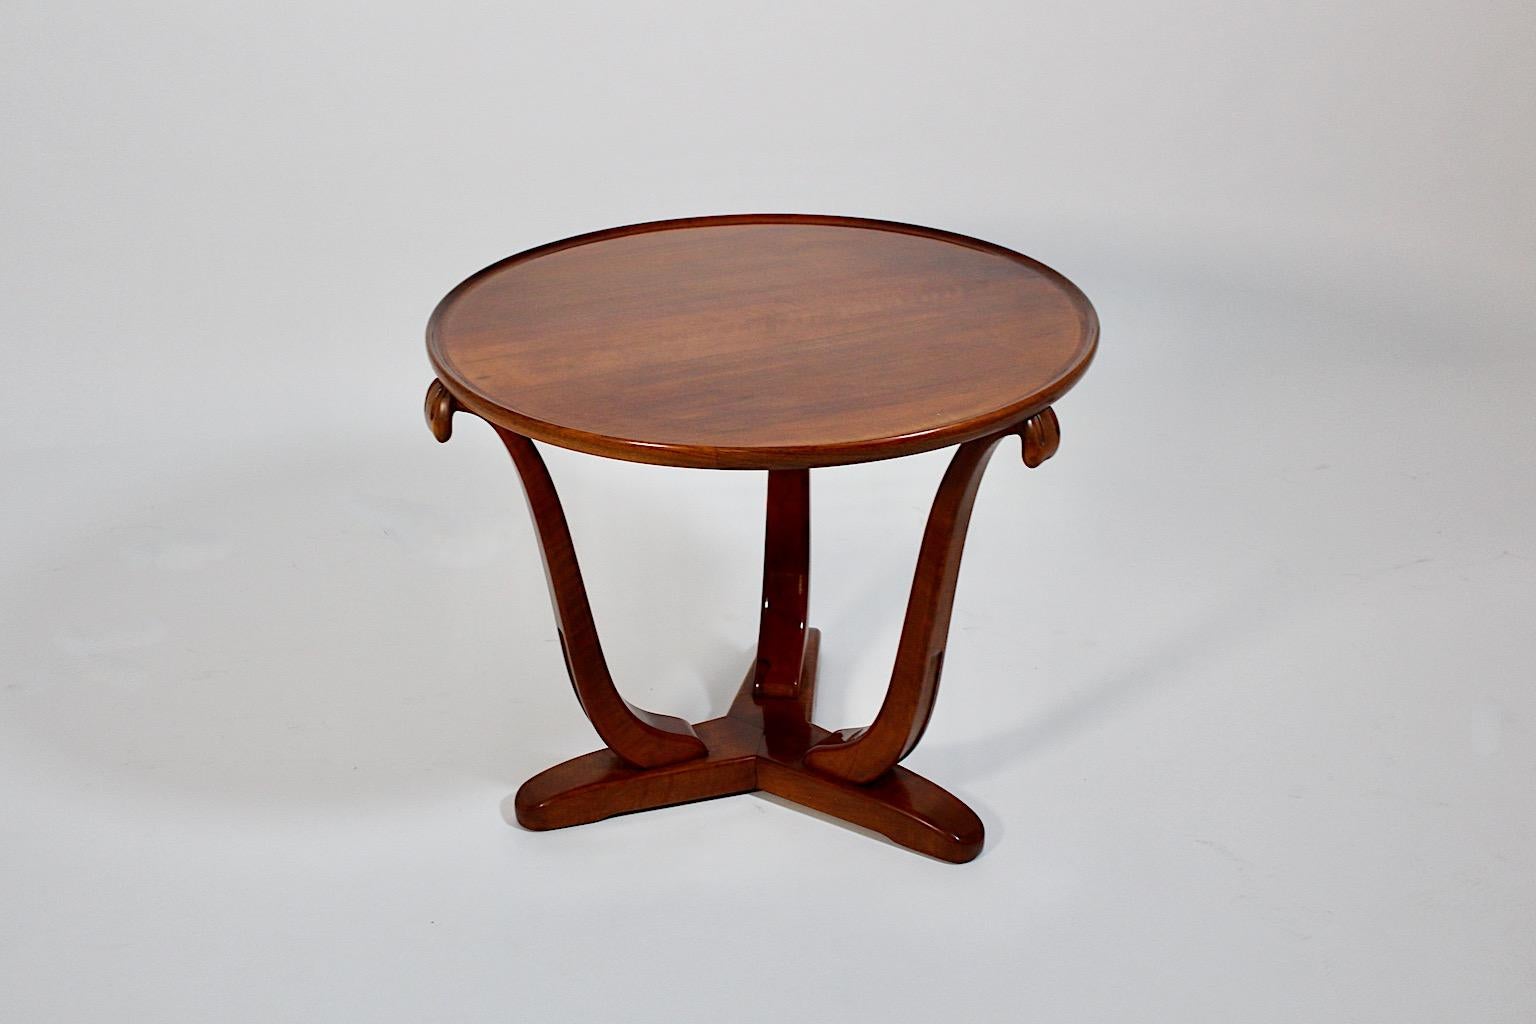 Mid-20th Century Art Deco Vintage Solid Walnut Circular Side Table, 1930s, France For Sale